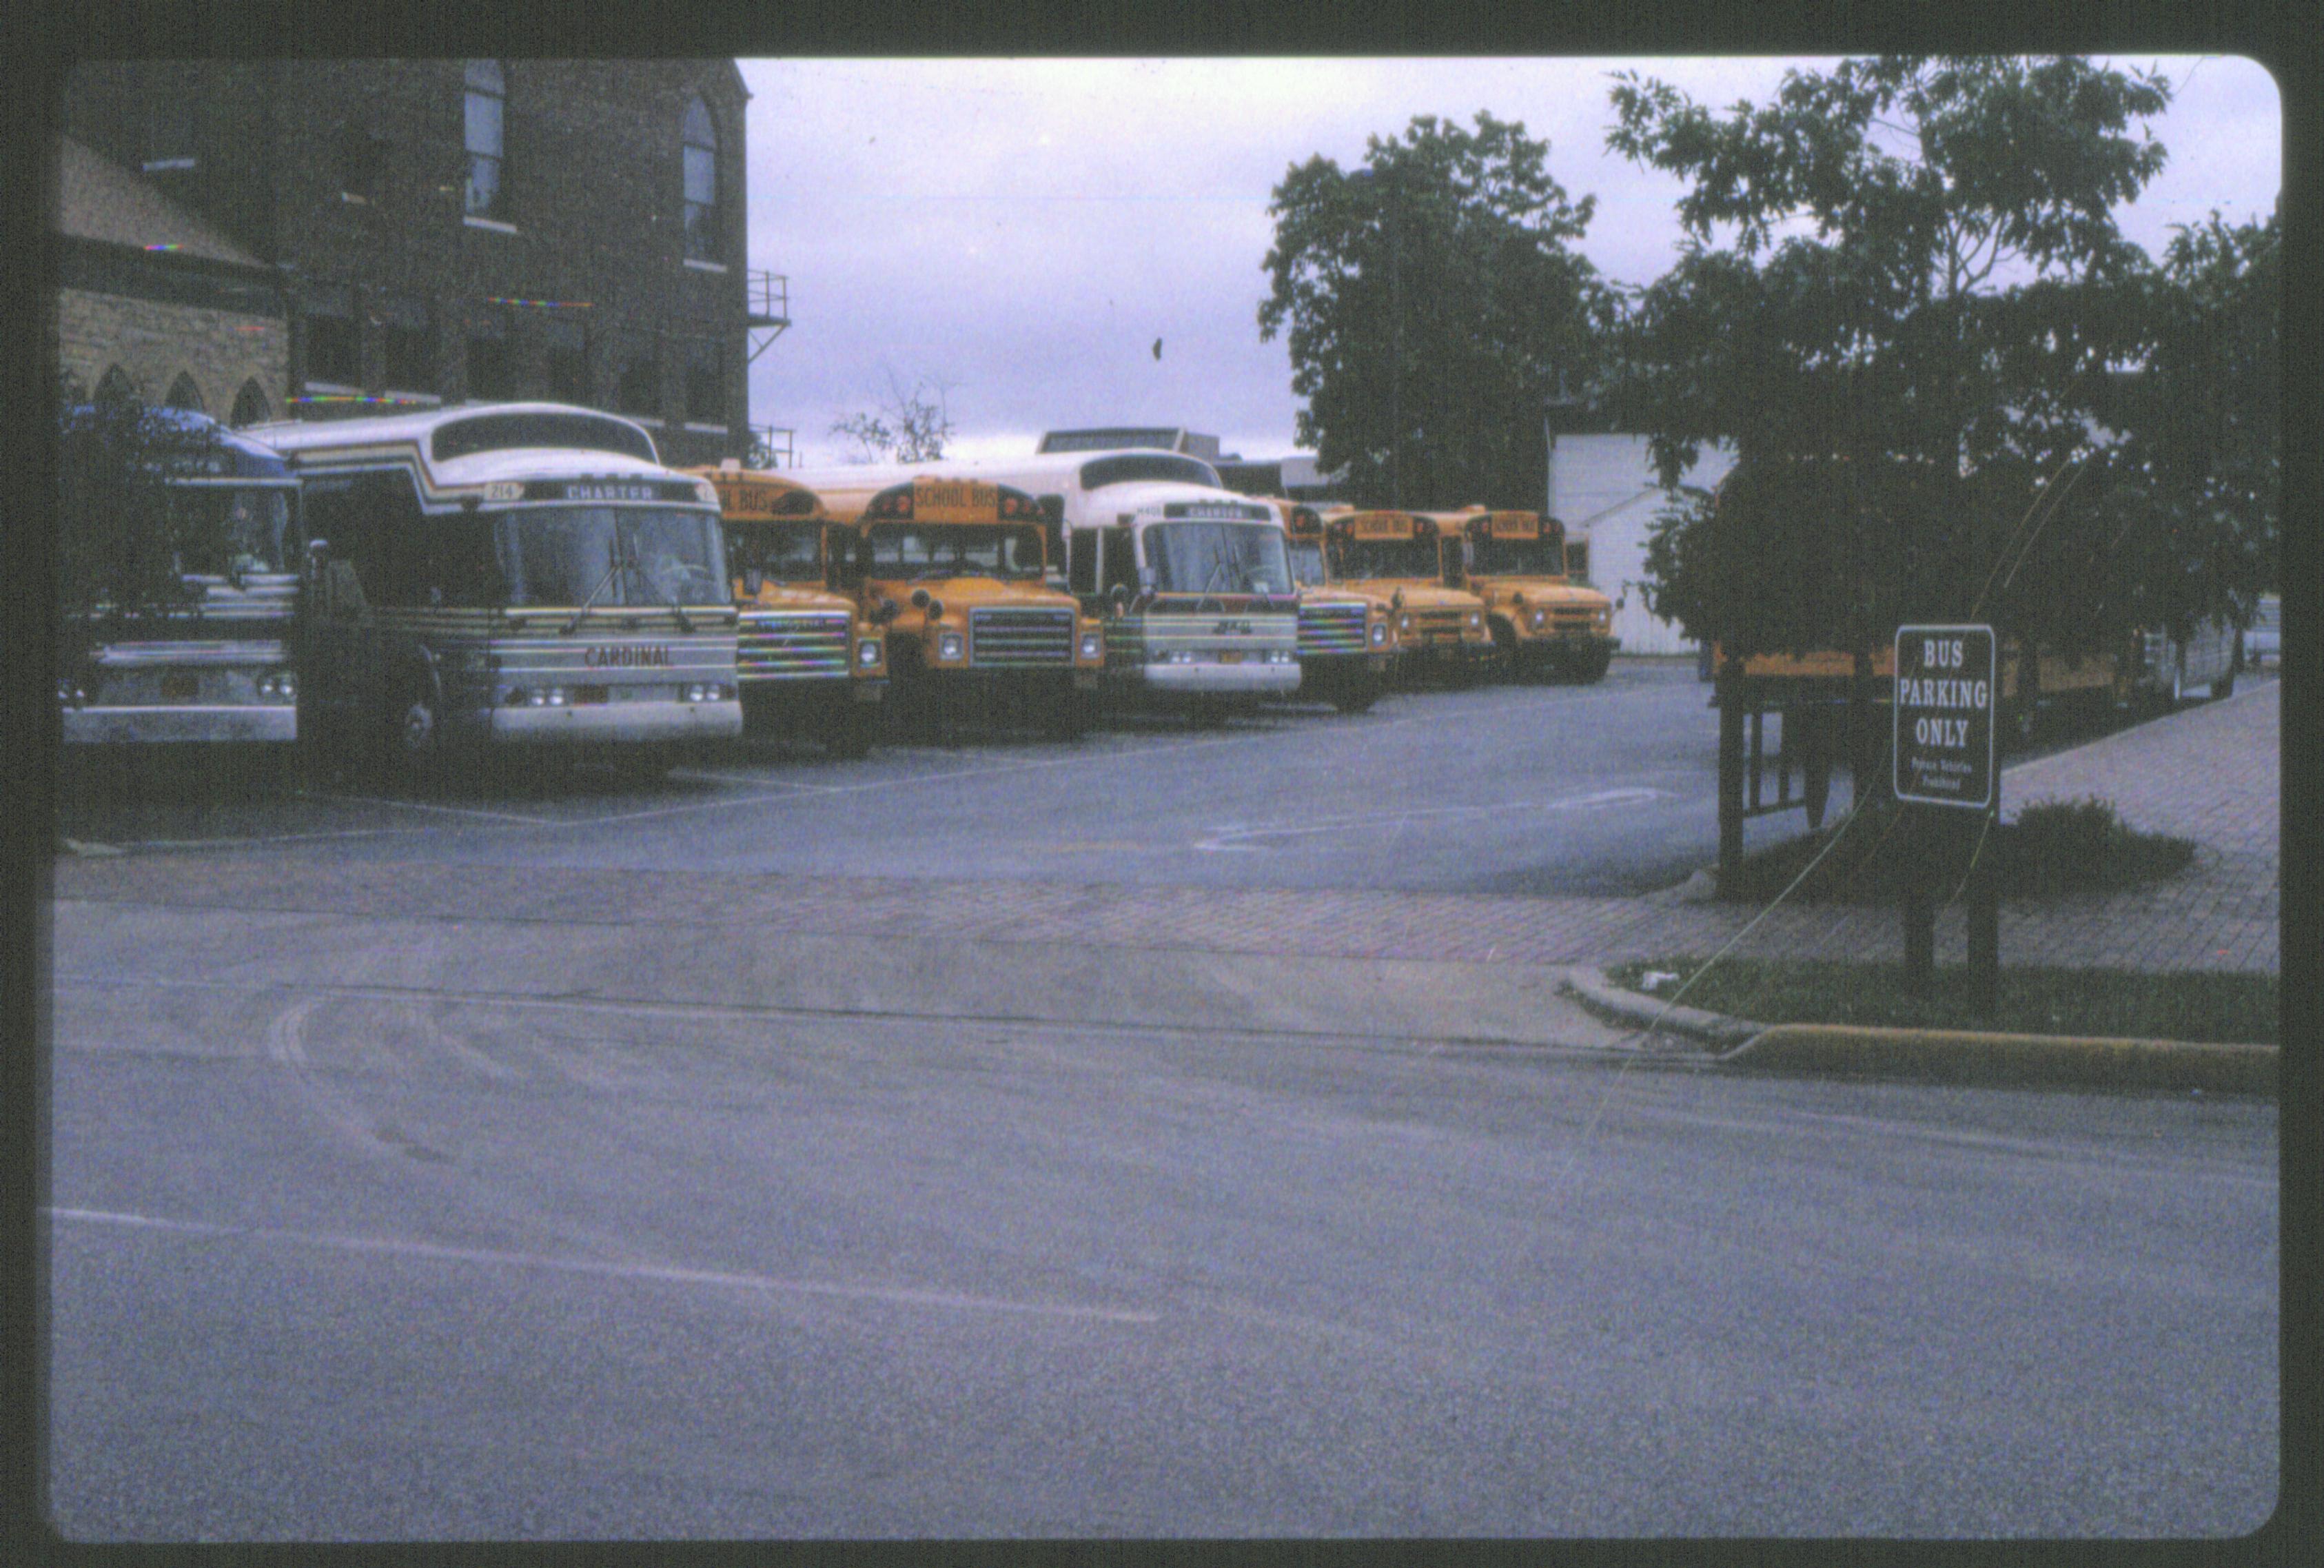 Parking lots - bus parking lot, Grace Lutheran Church on left, Beedle House in background looking East bus, parking lot, Grace Lutheran Church